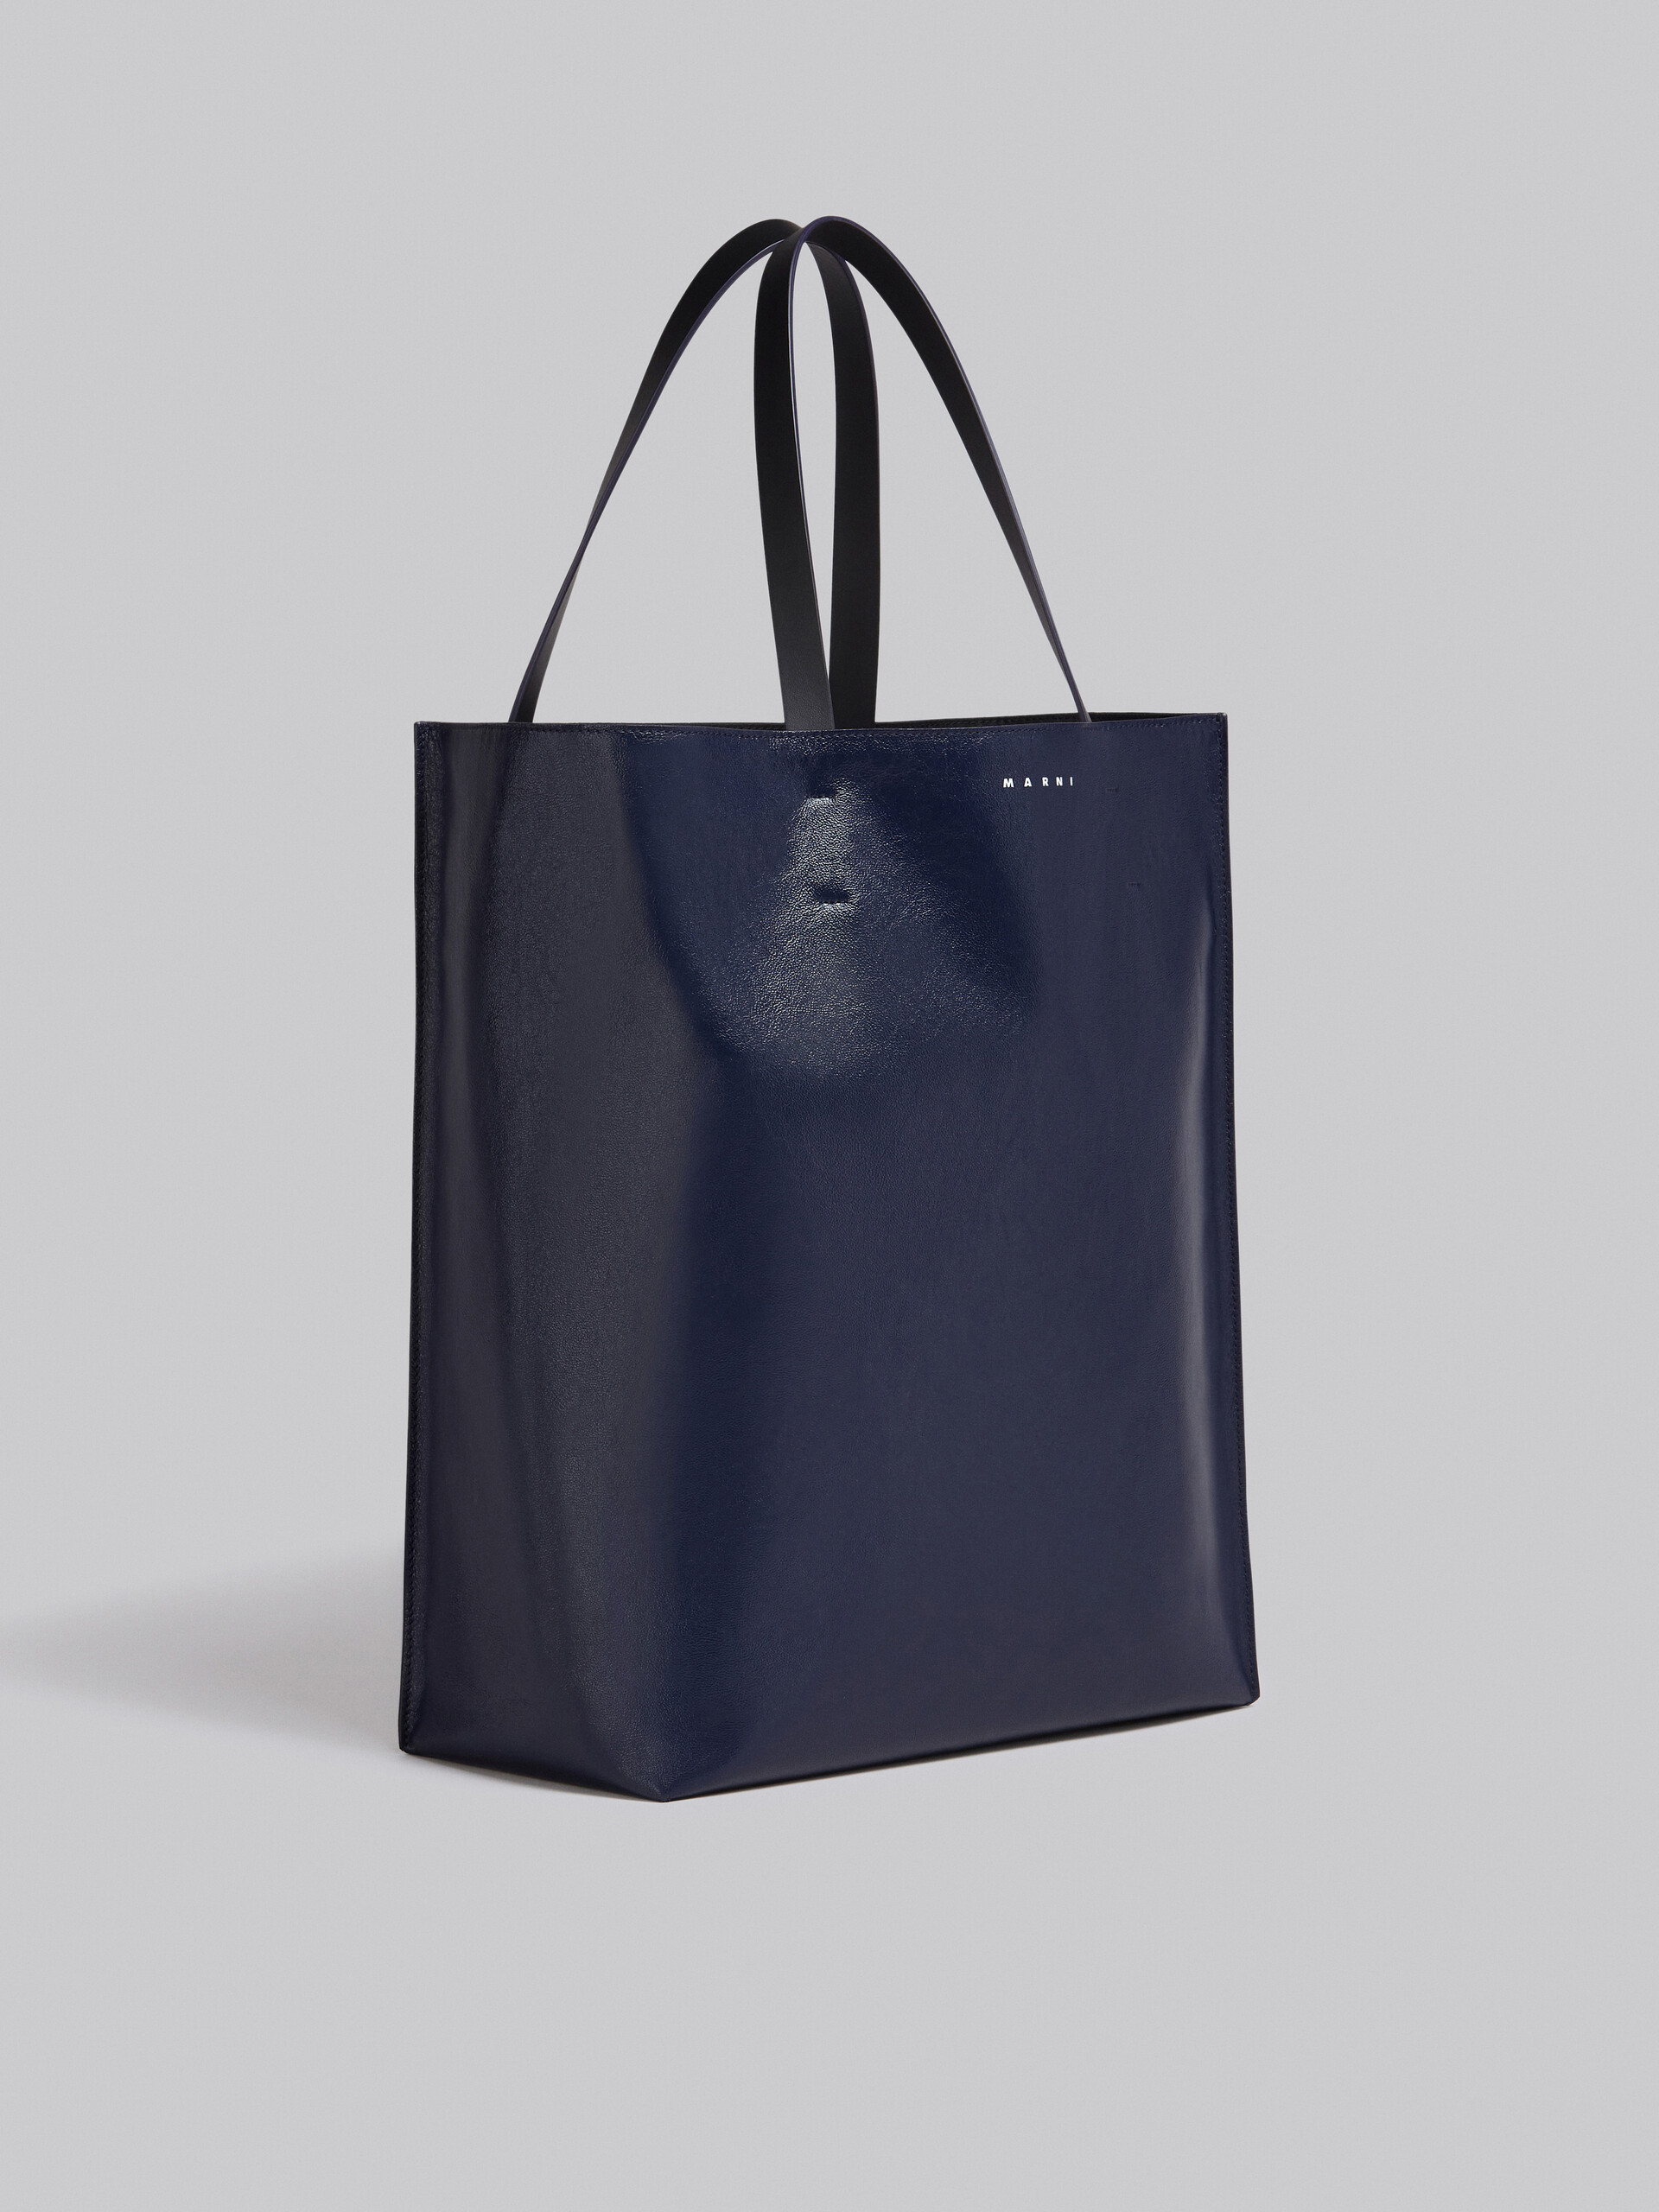 Museo Soft Large Bag in black and blue leather